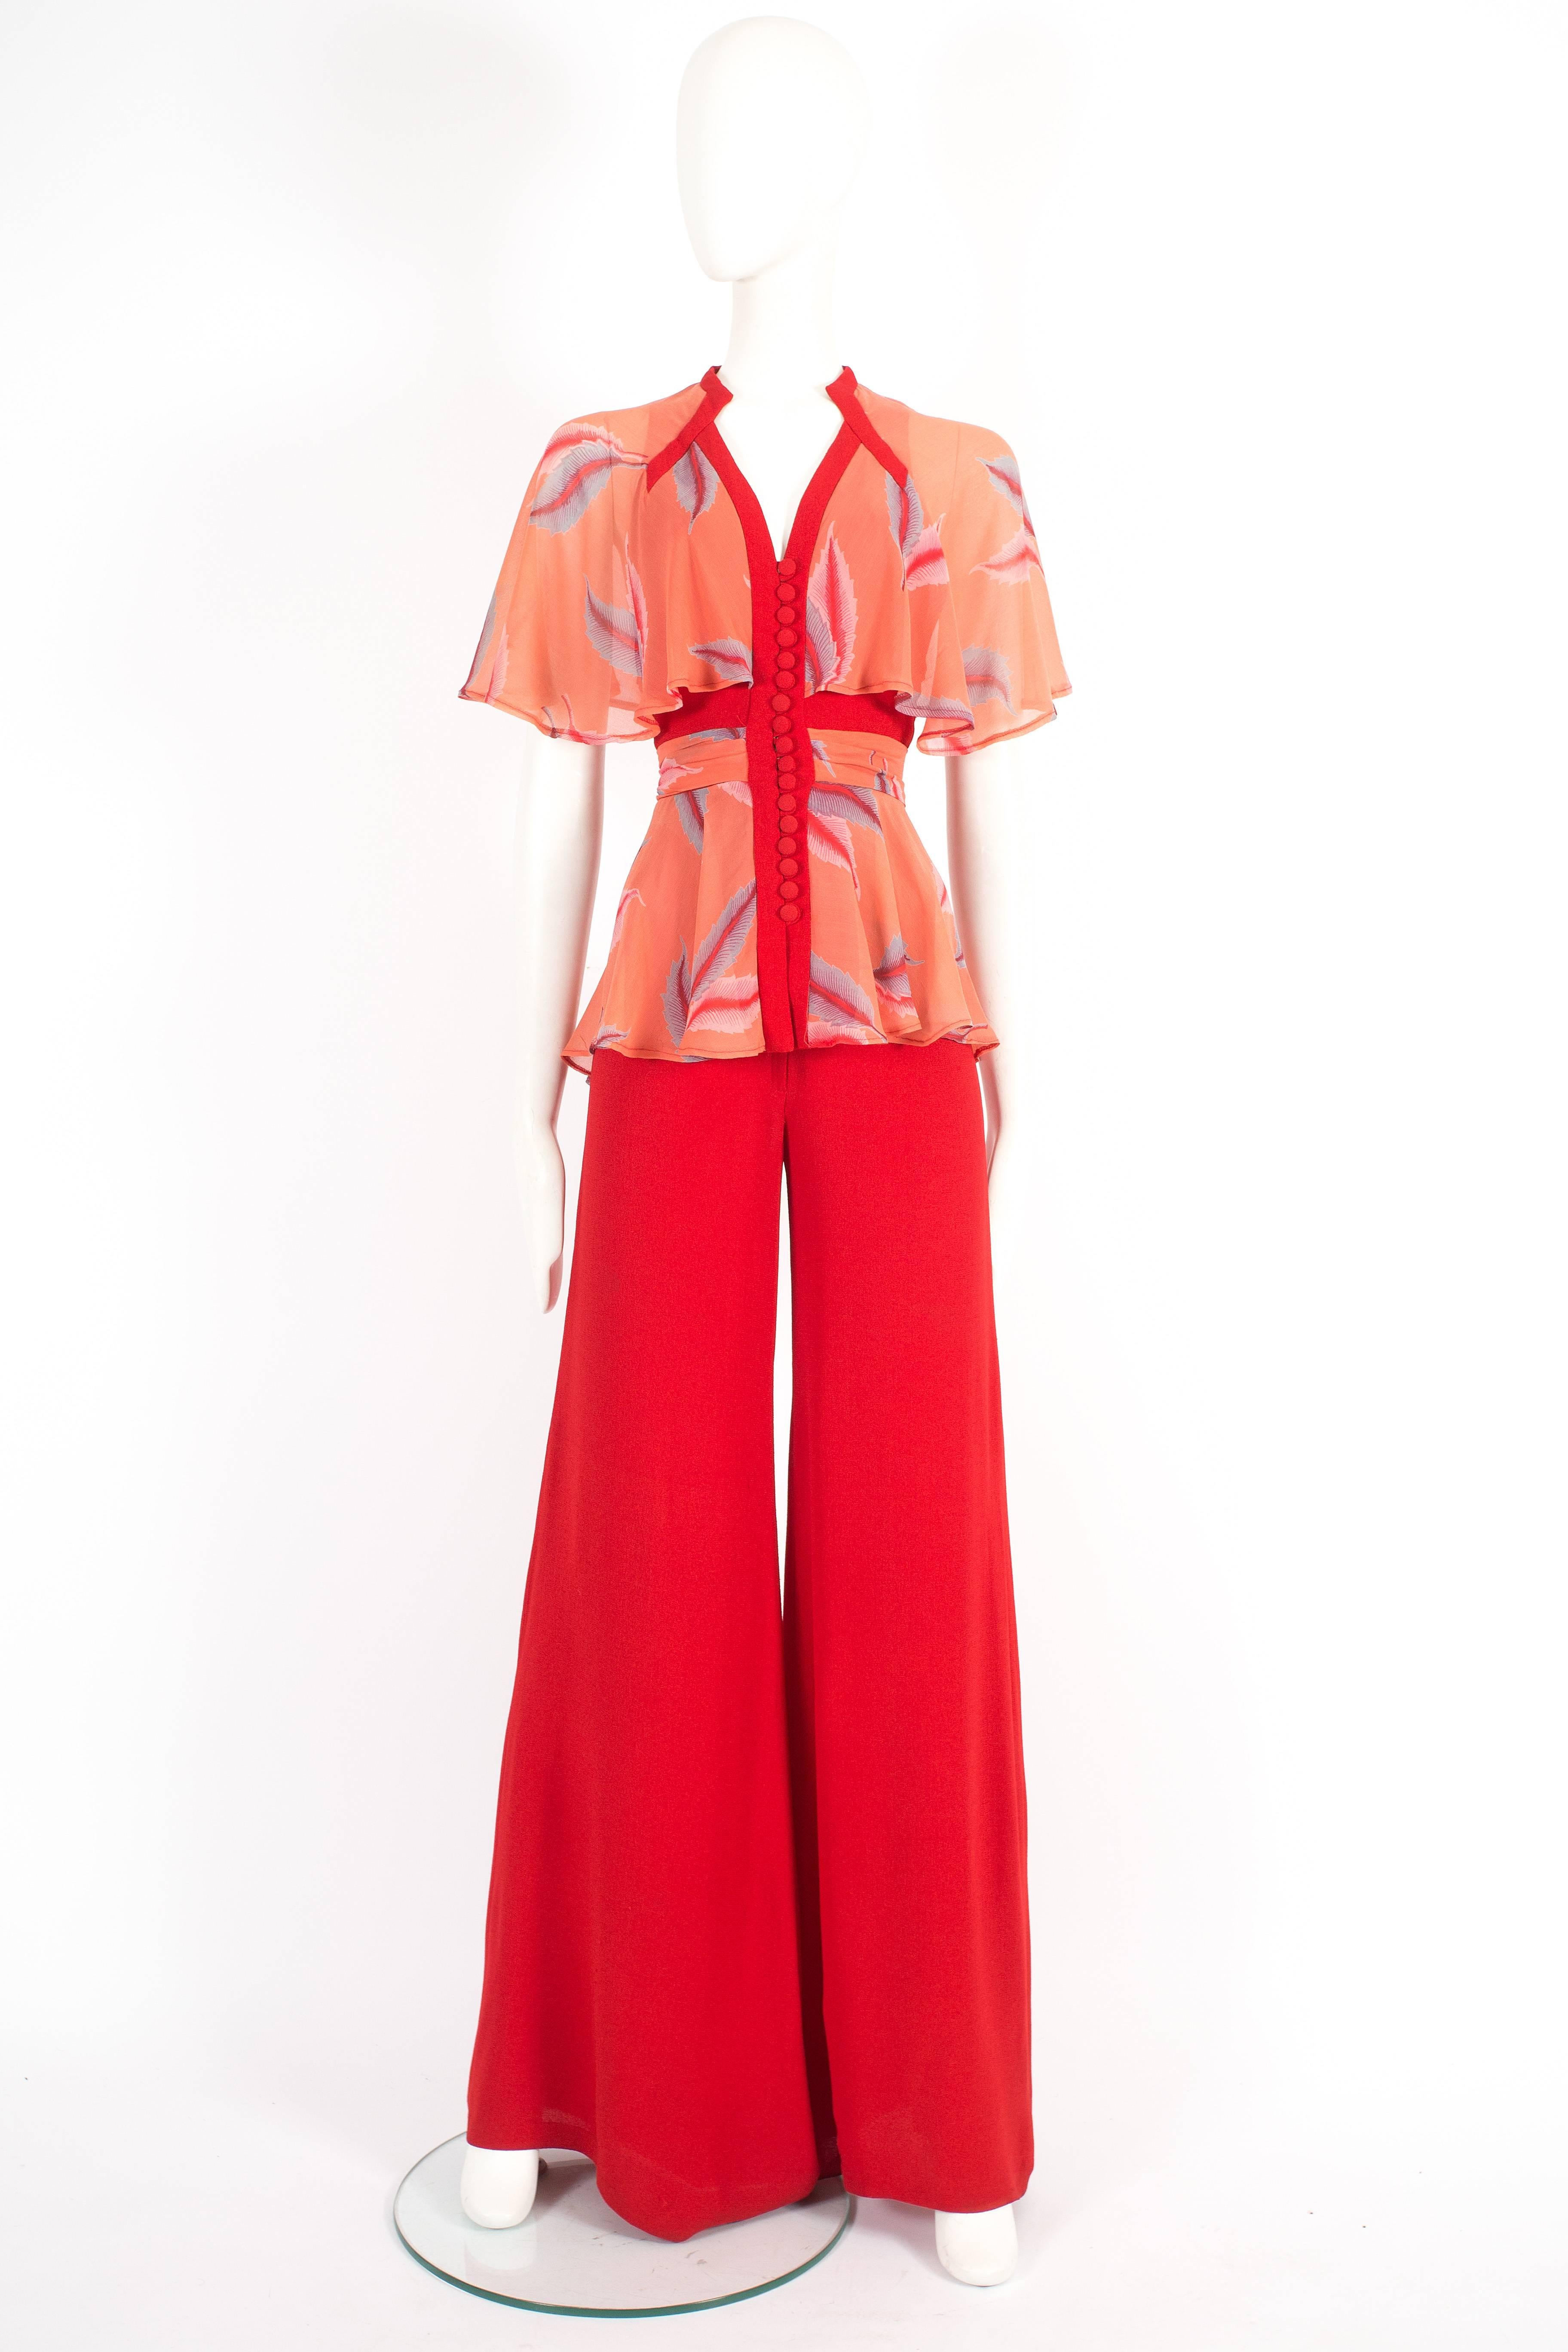 Xenia pantsuit, circa 1970. Constructed in red moss crepe and chiffon, features button fastenings, waist tie, high waisted wide leg pants and capelet. Very Ossie Clark!

